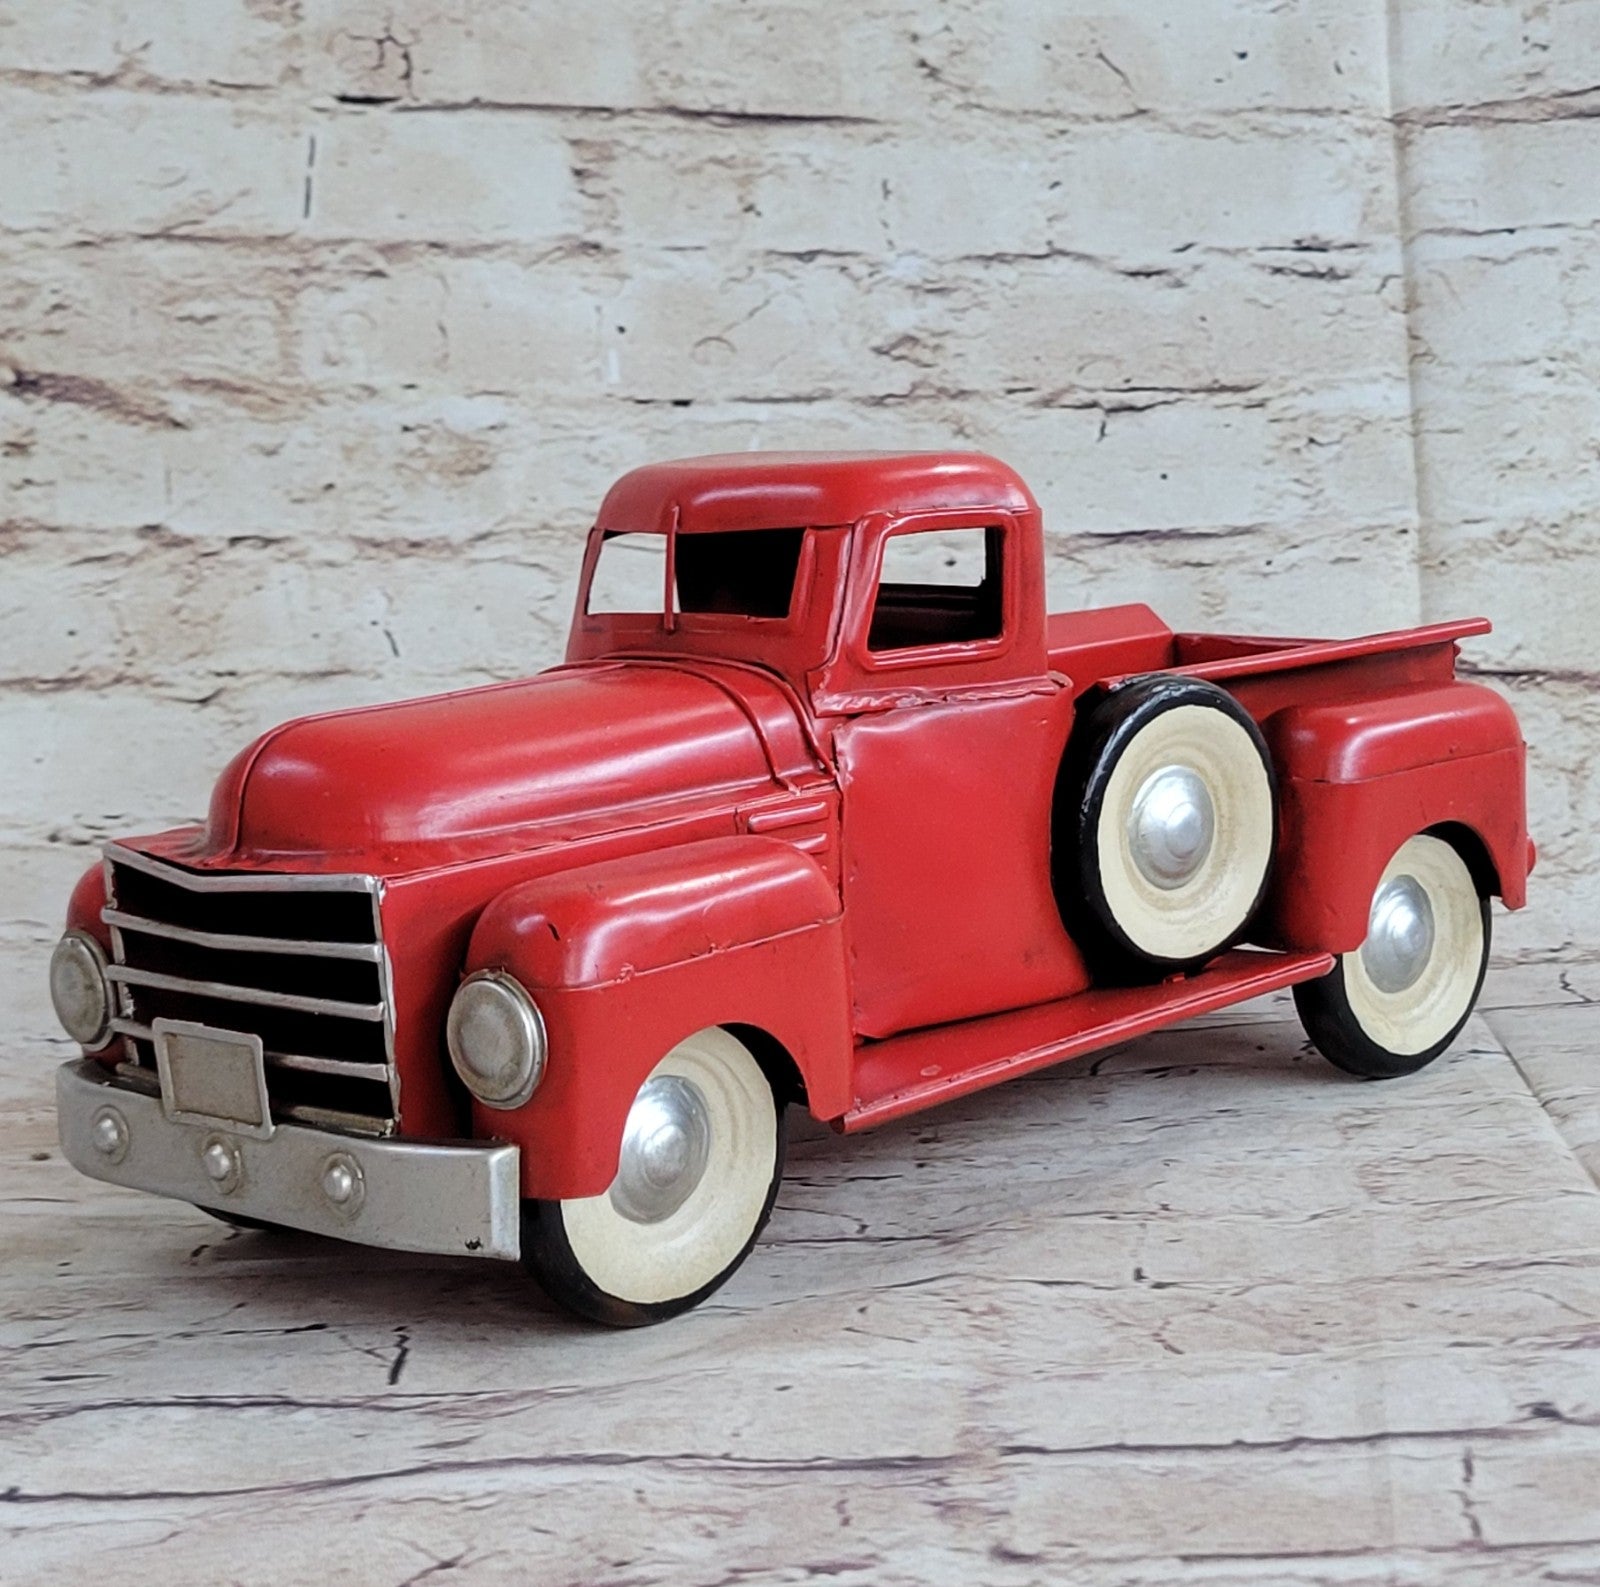 Vintage Classic aArtwork RED GMC Pickup Truck Hand Made Masterpiece Statue GIFT